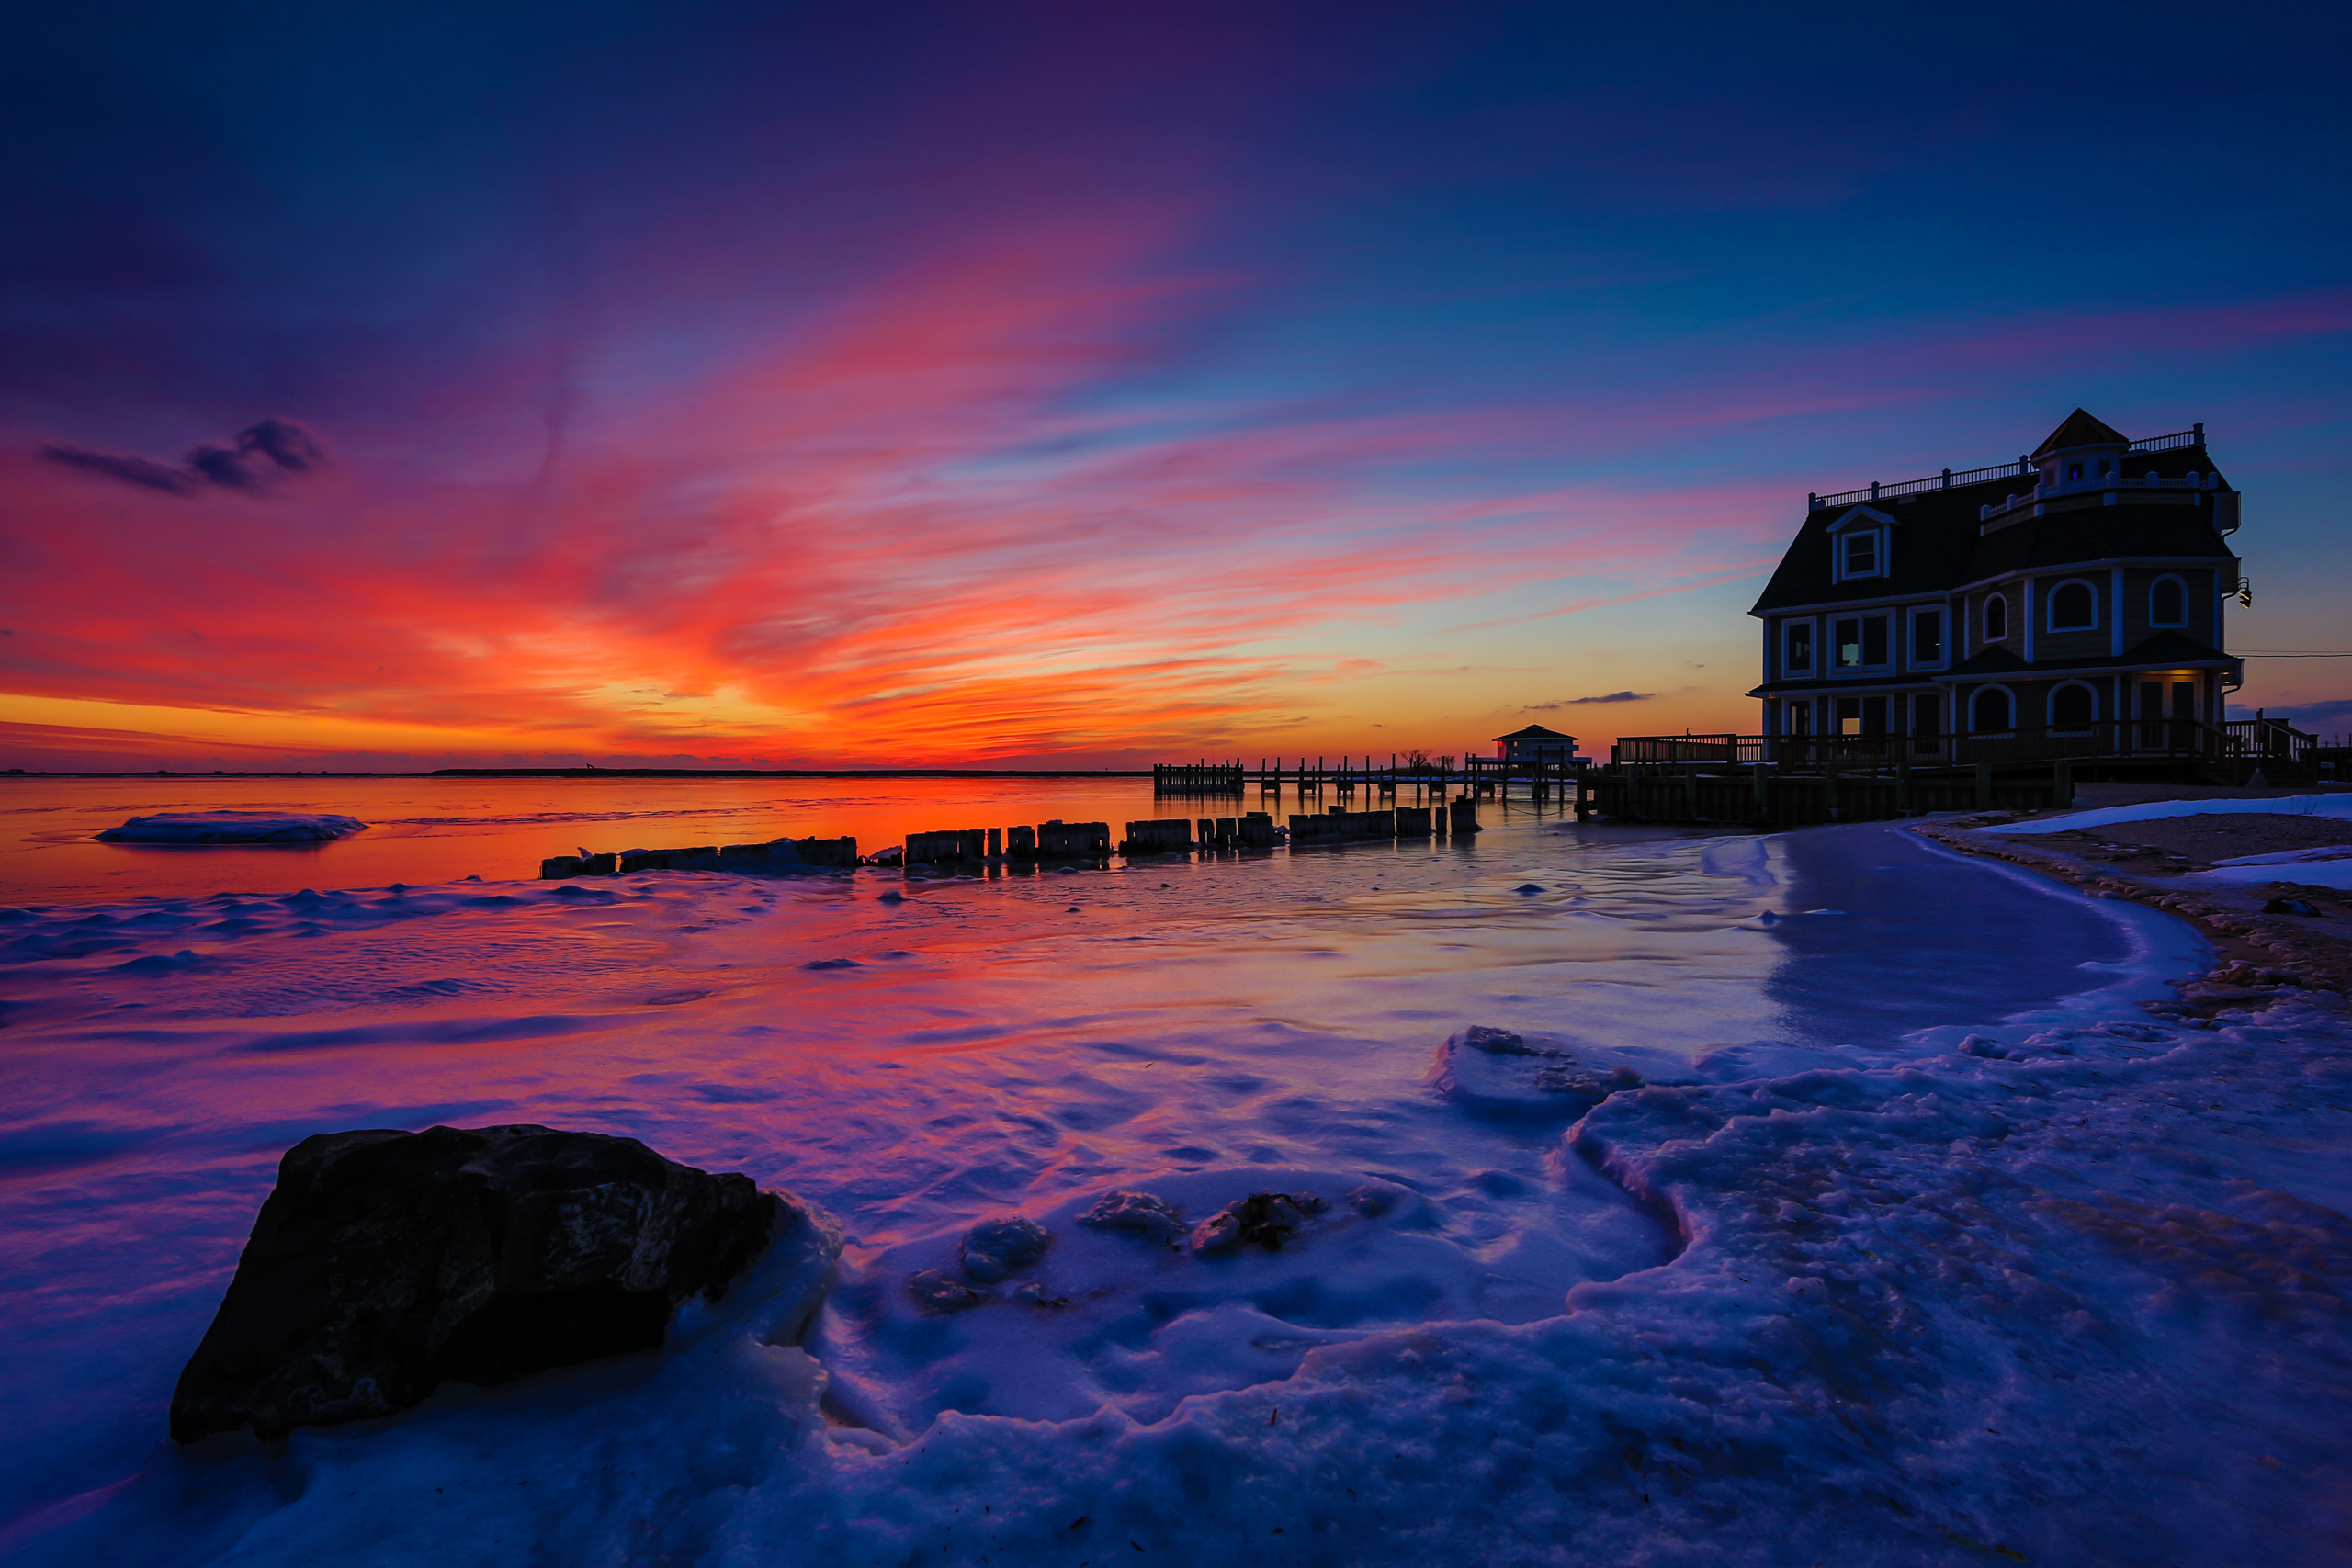 A wide angle HDR capture of a magnificent sunset at Antoinetta's Restaurant on Cedar Run Dock Road.